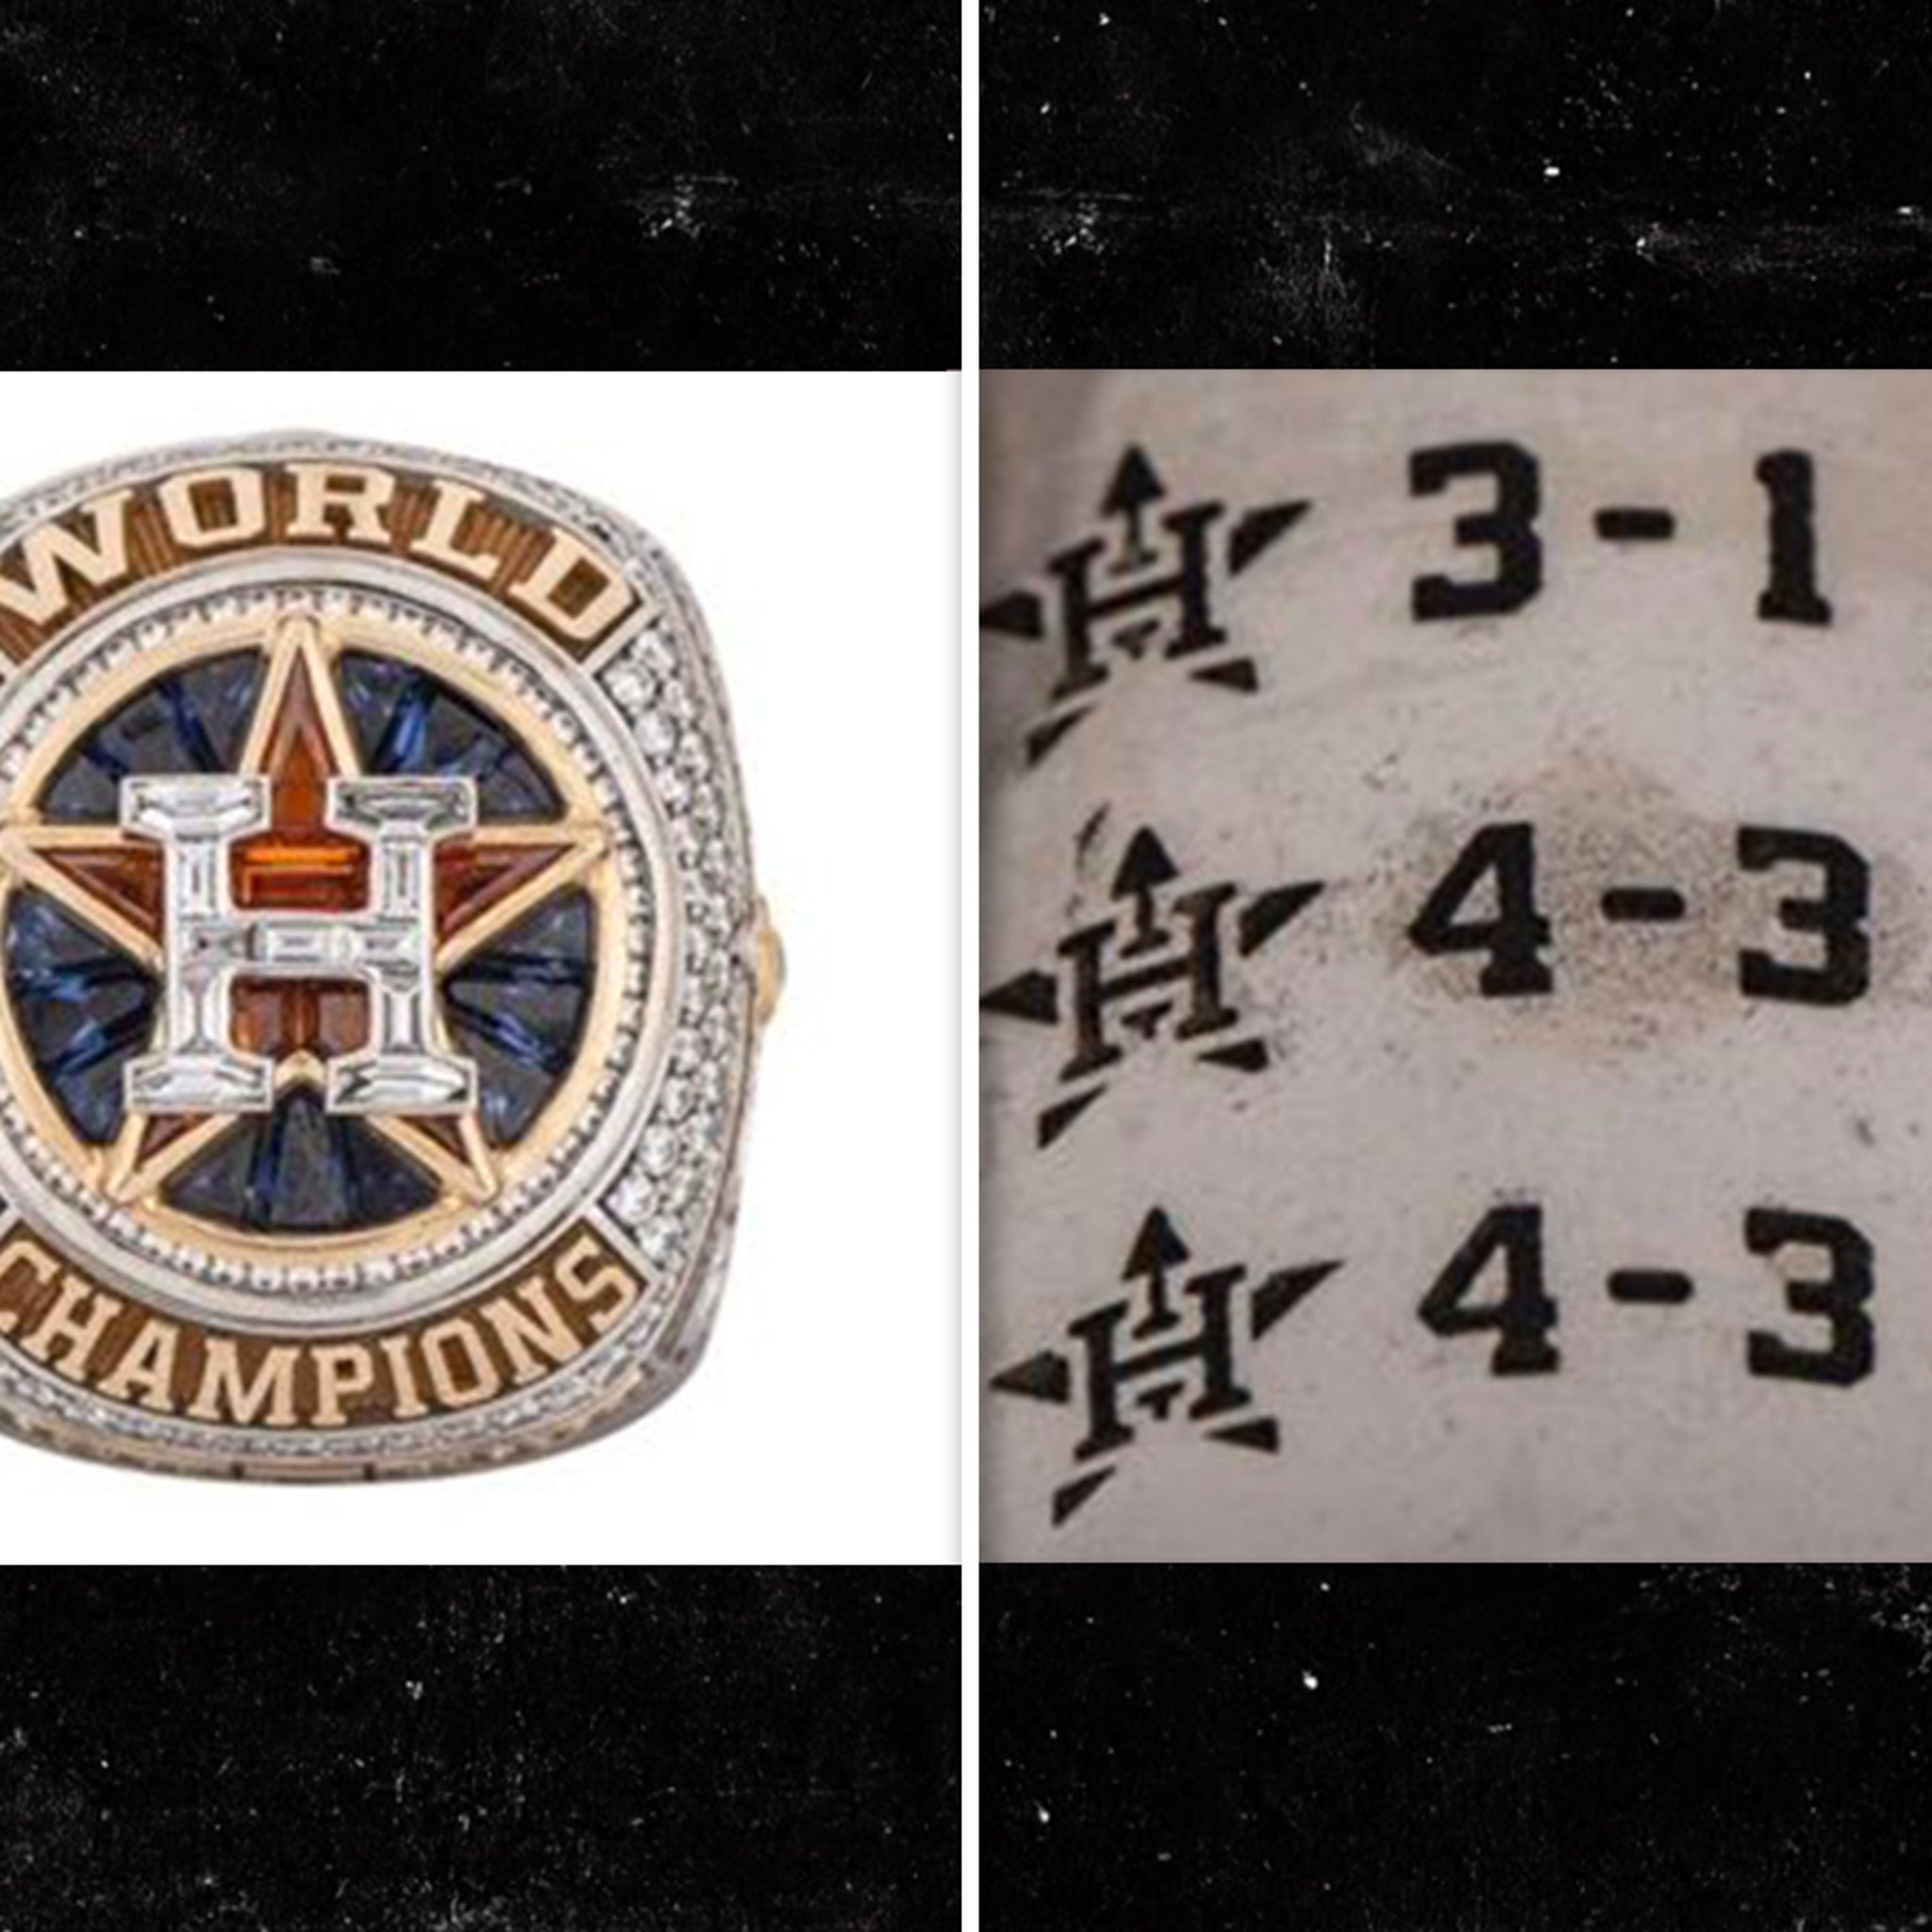 Houston Strong' mantra rings true after Astros' World Series win - ABC News